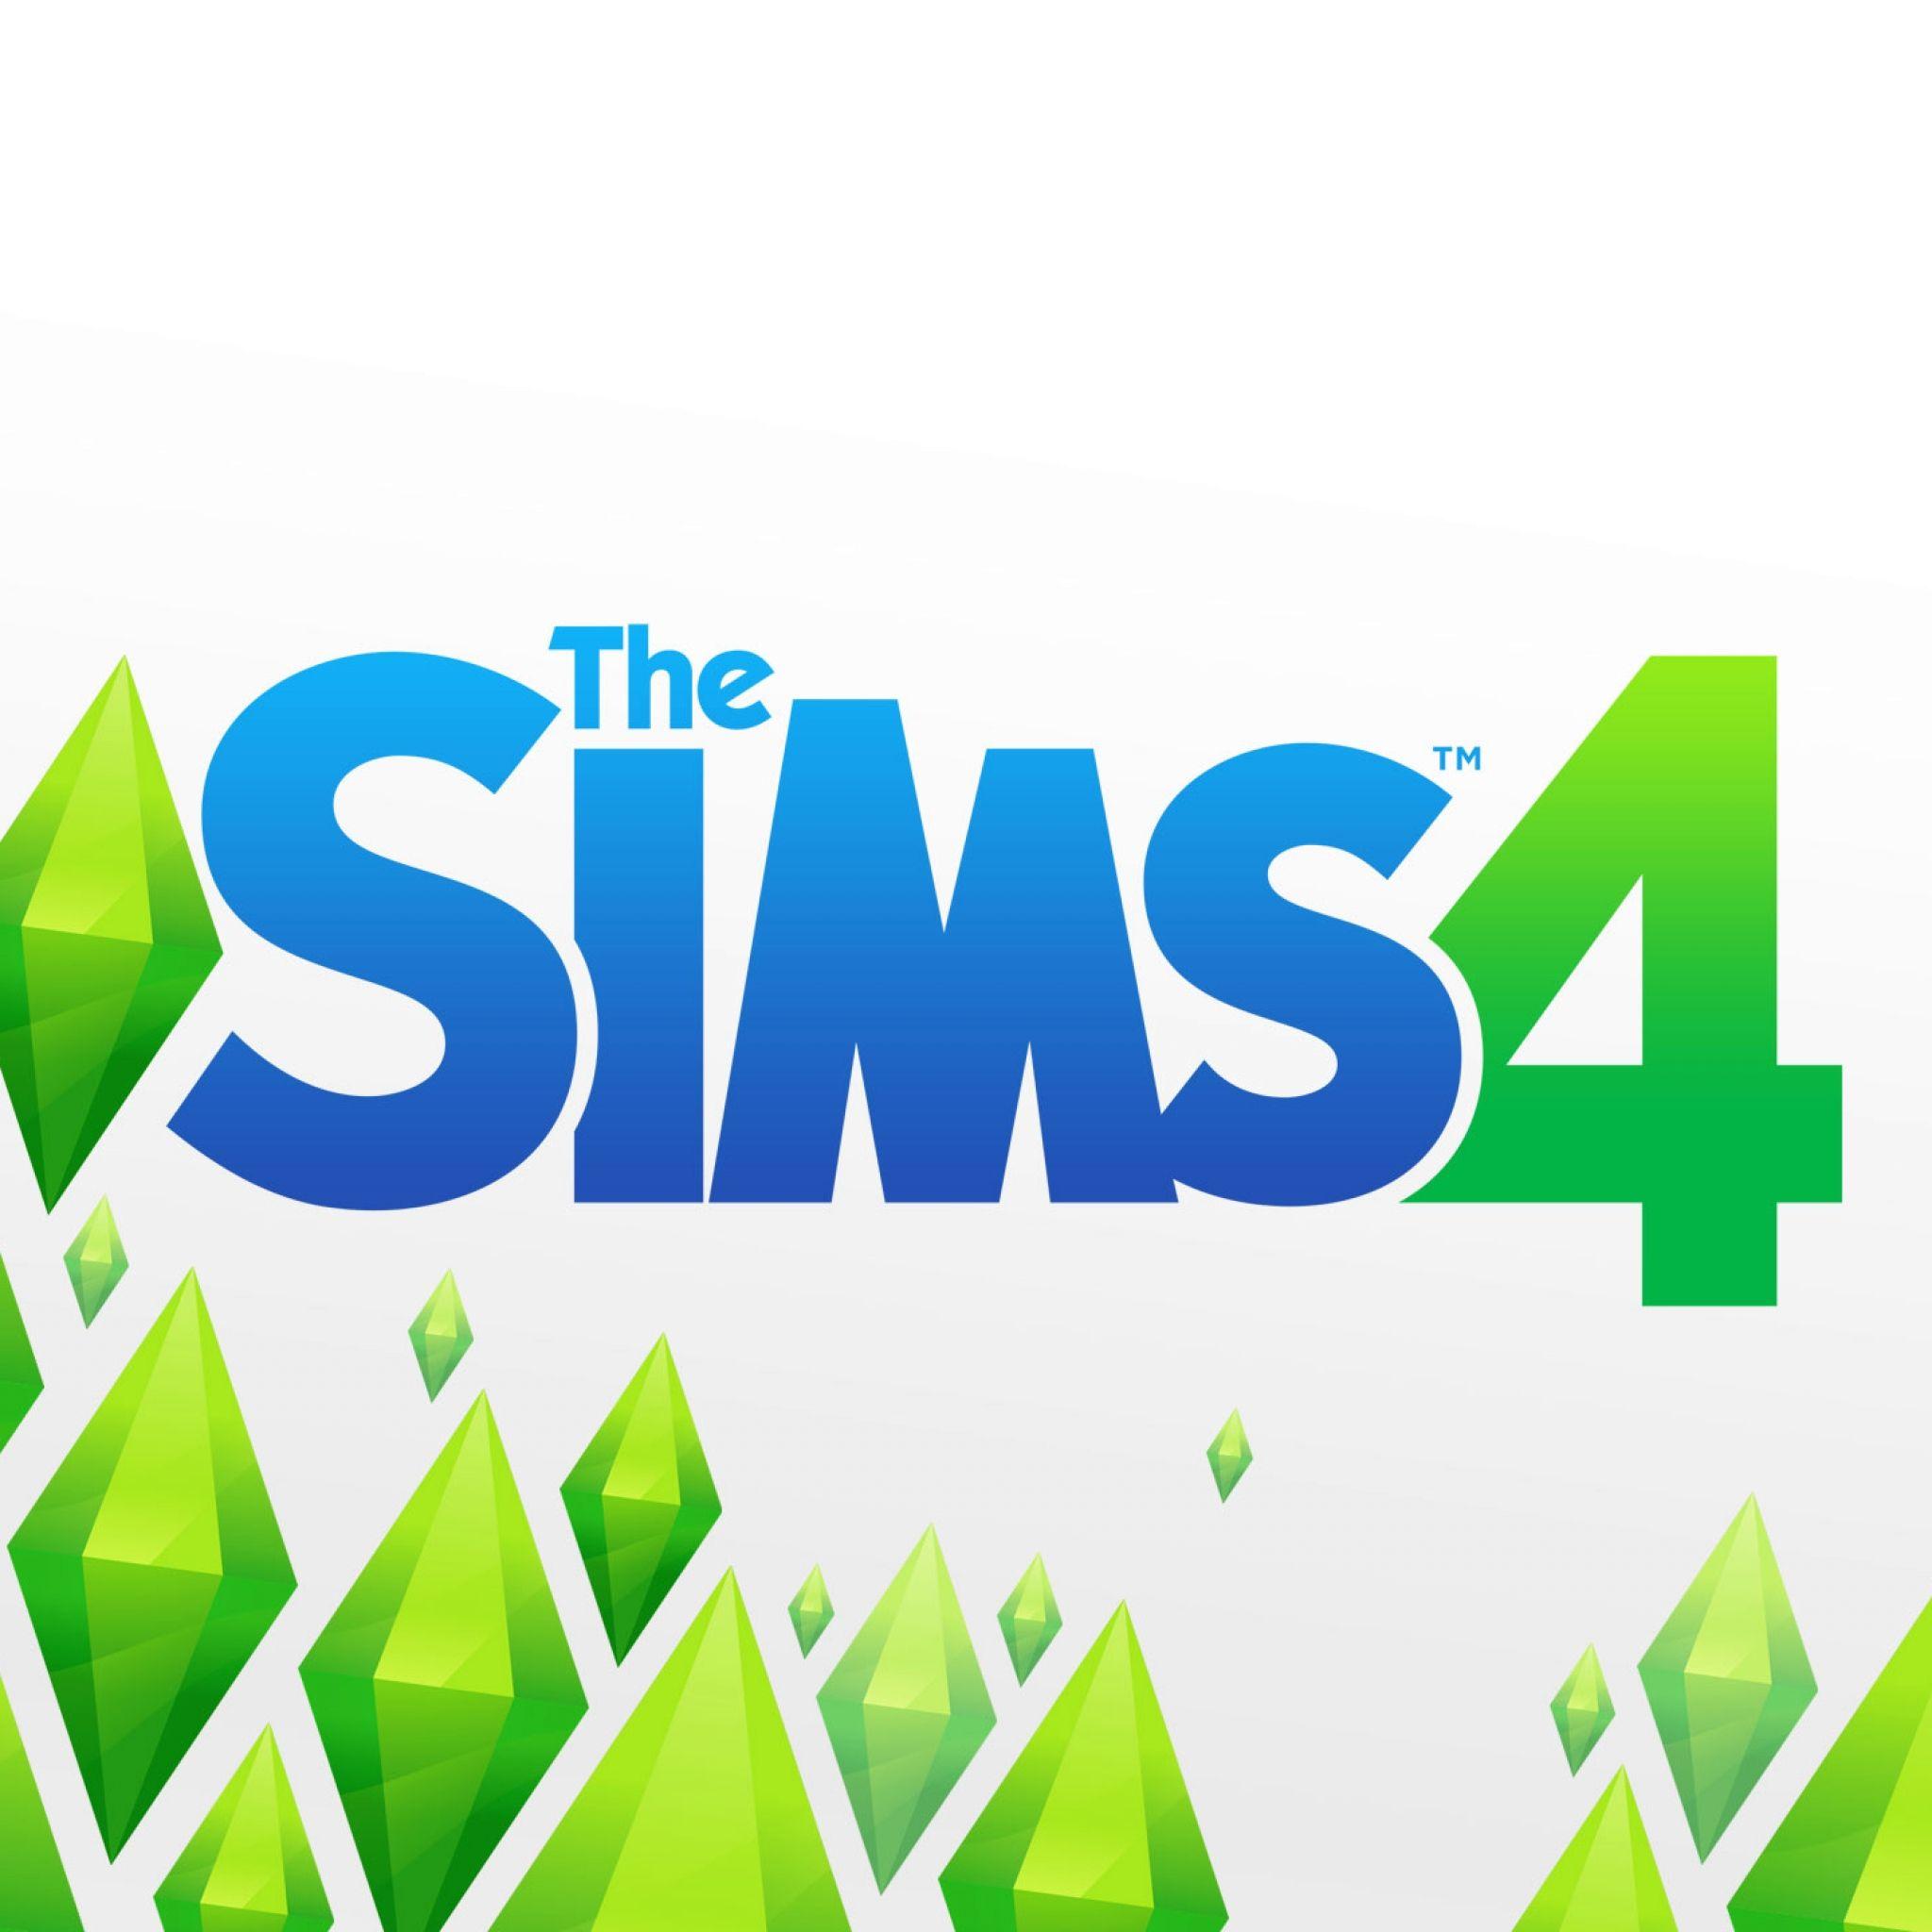 Download Wallpaper 2048x2048 The sims Maxis software, Pc